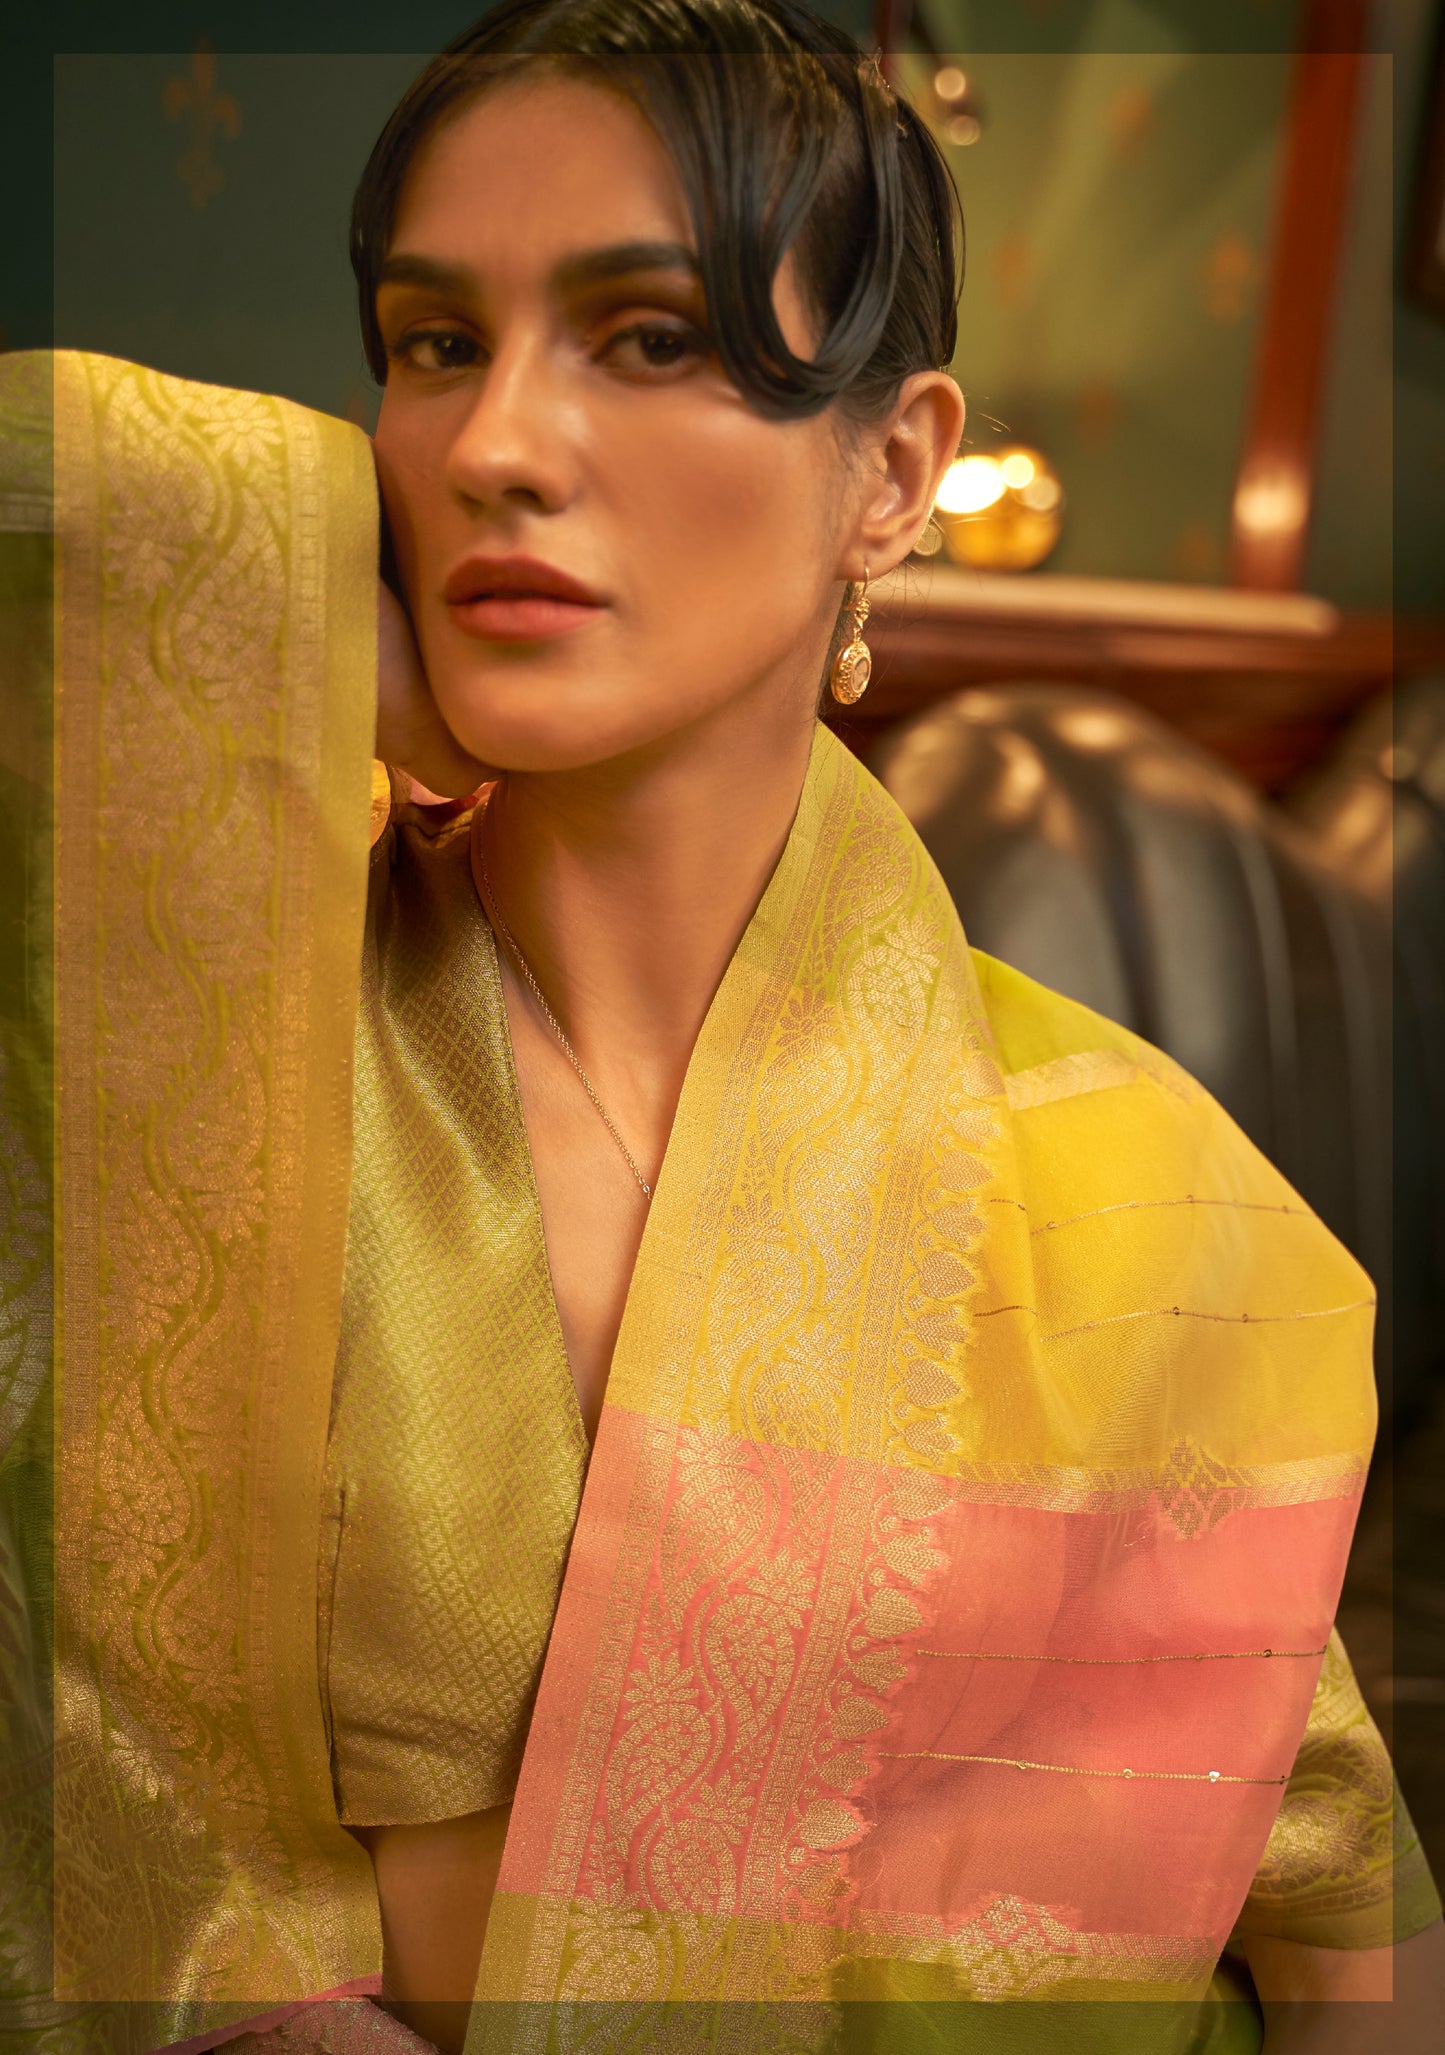 Golden and Yellow Shadded Beautiful Organza Silk Saree Blouse for Woman